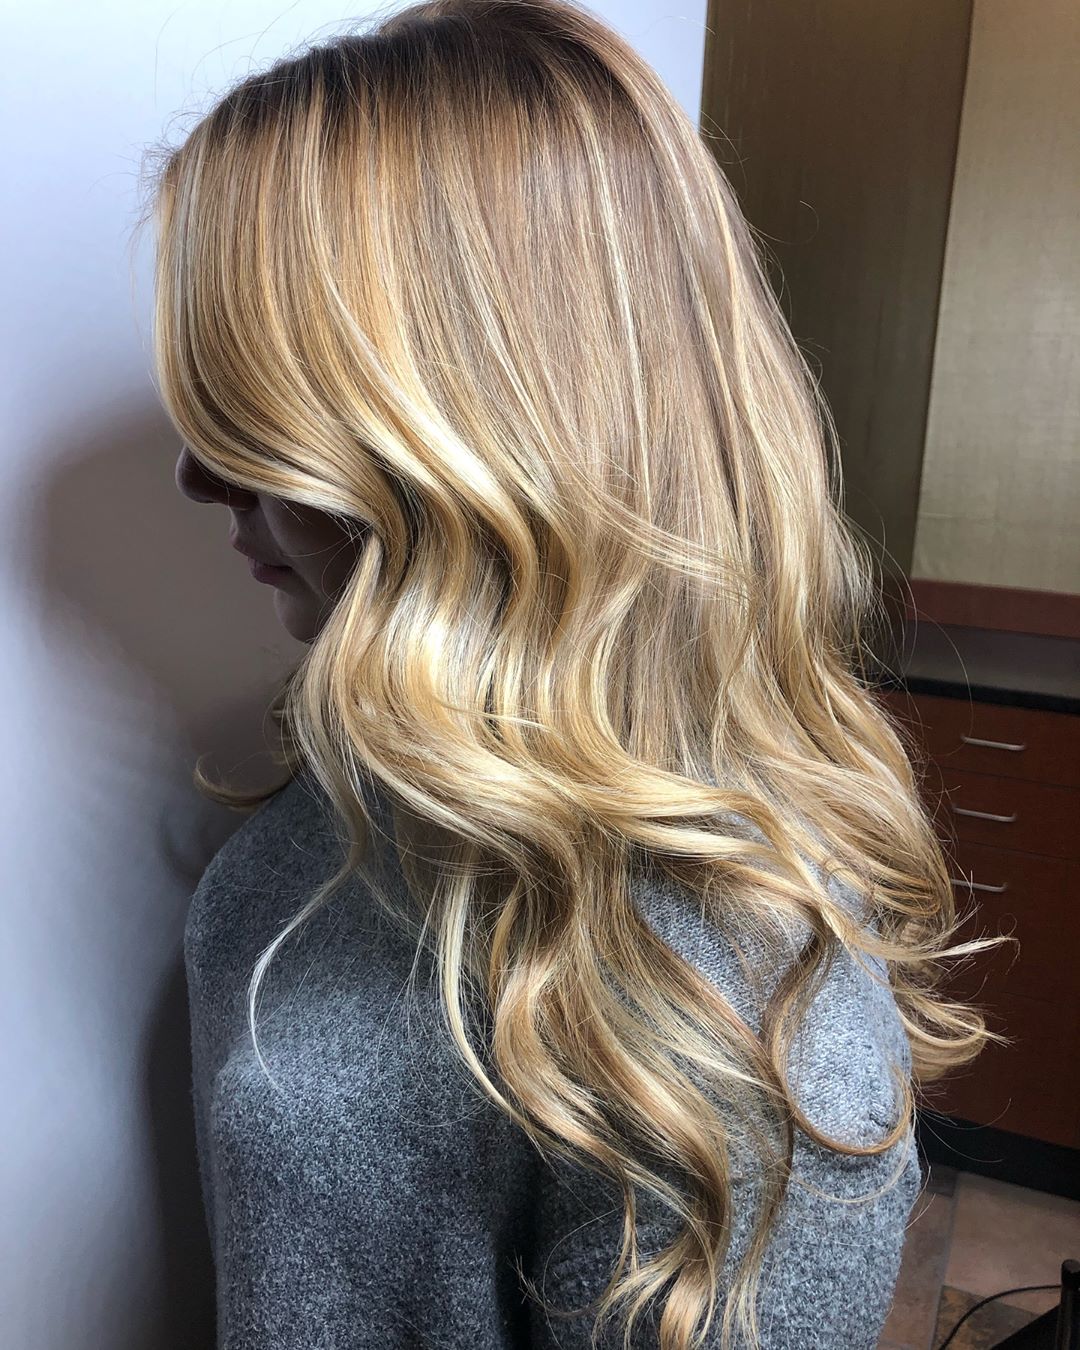 Five New Hair Color Trends To Try In 2019 Cole S Salon